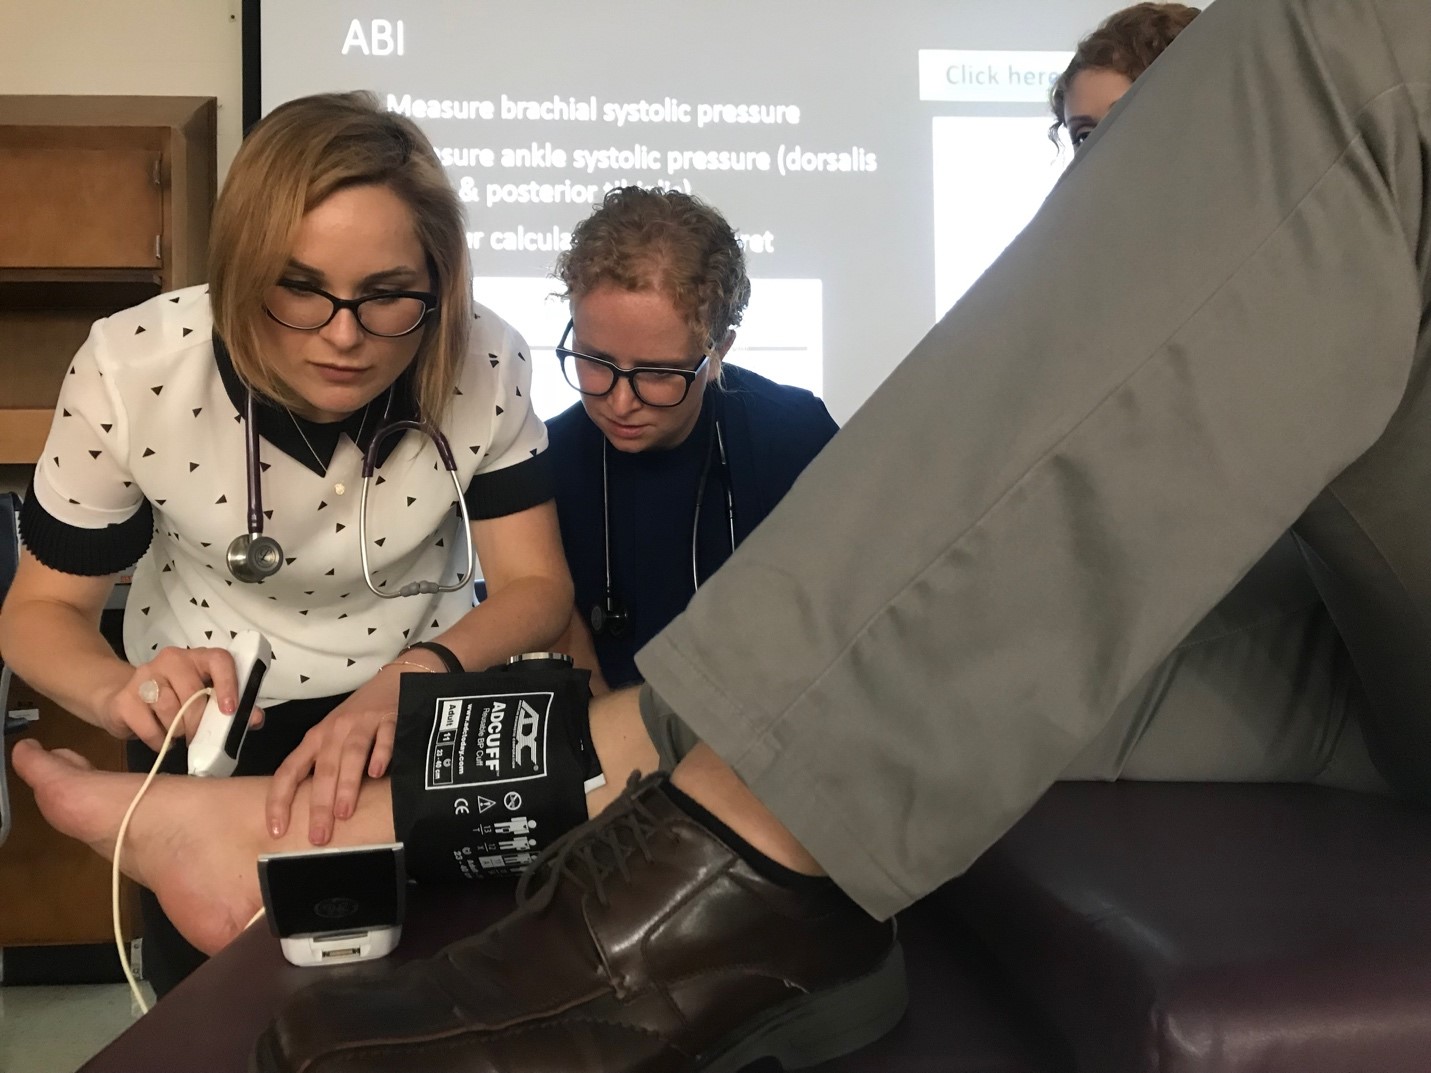 Handheld Ultrasound Education for Physician Assistant Programs